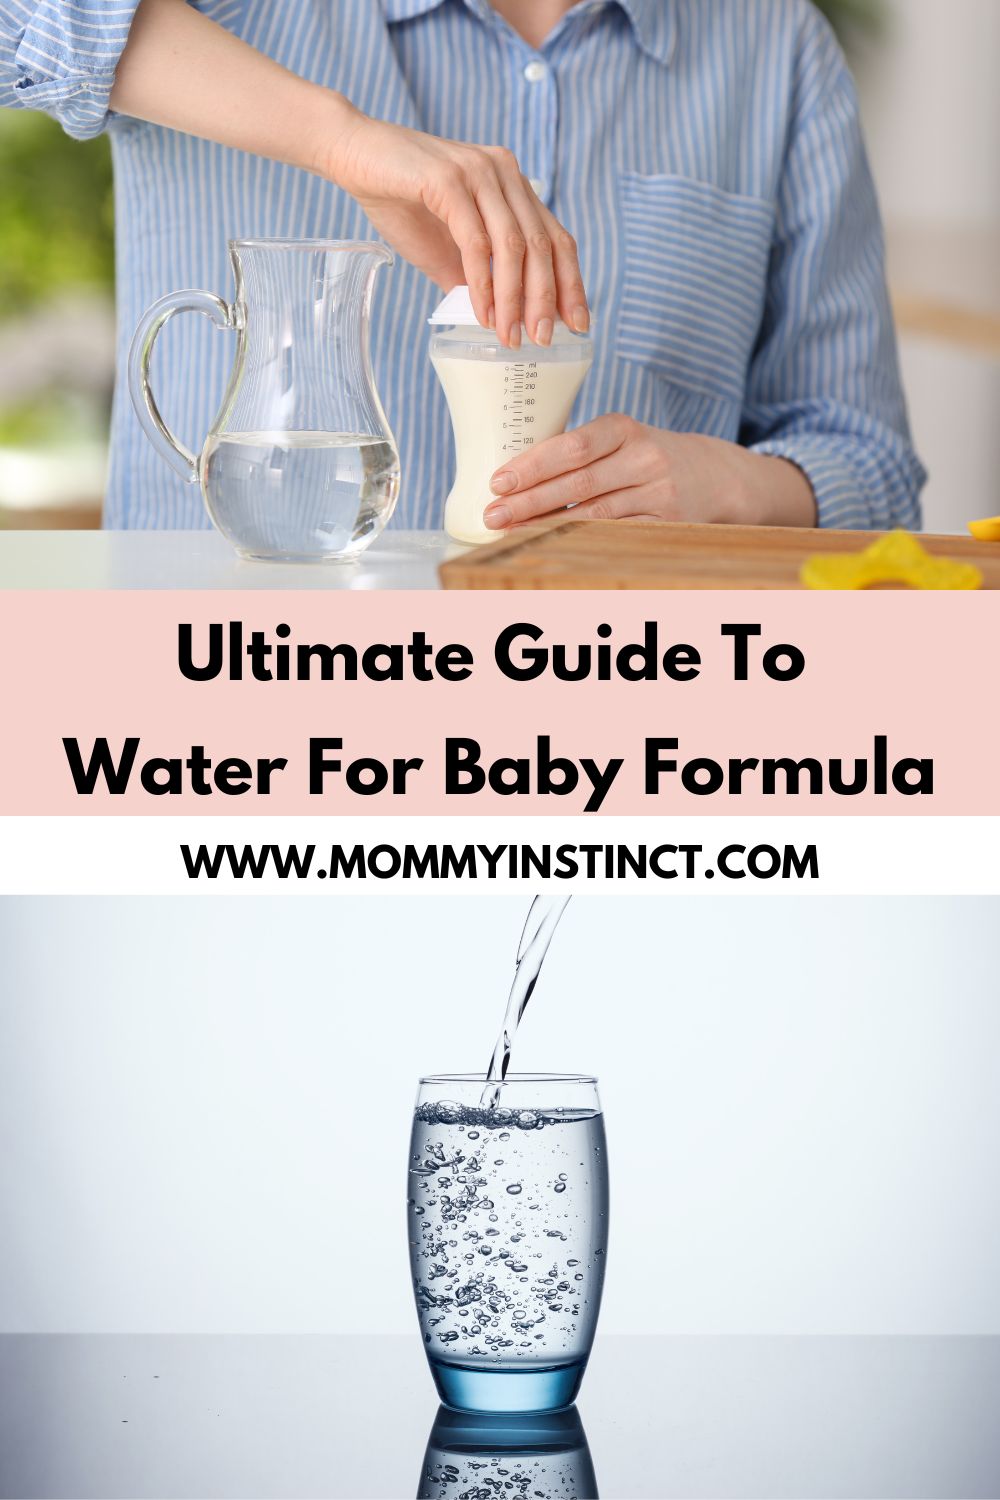 What type of water can you use for baby formula